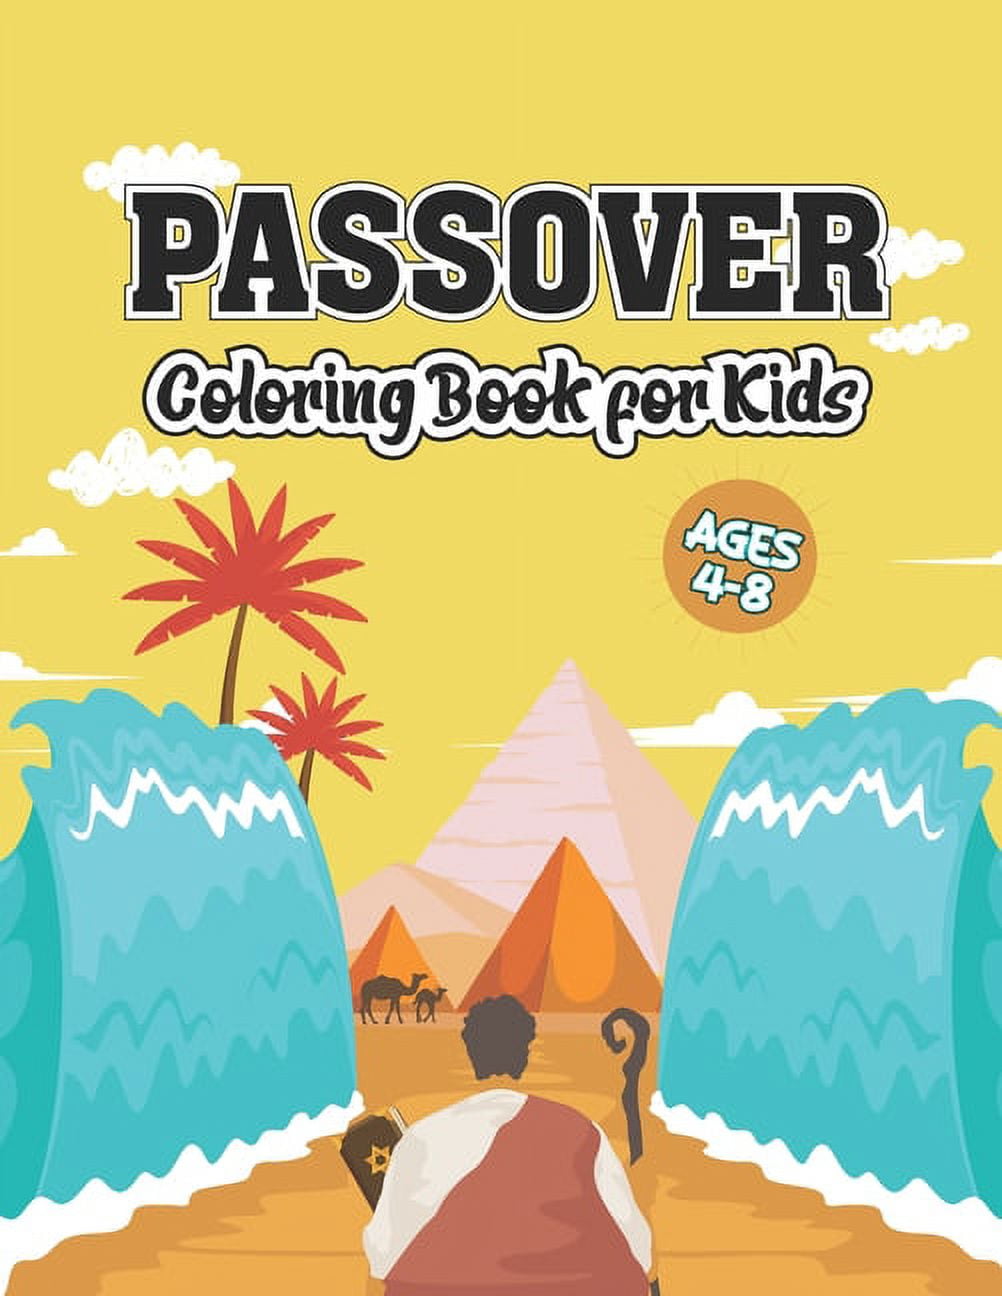 Passover coloring book for kids ages